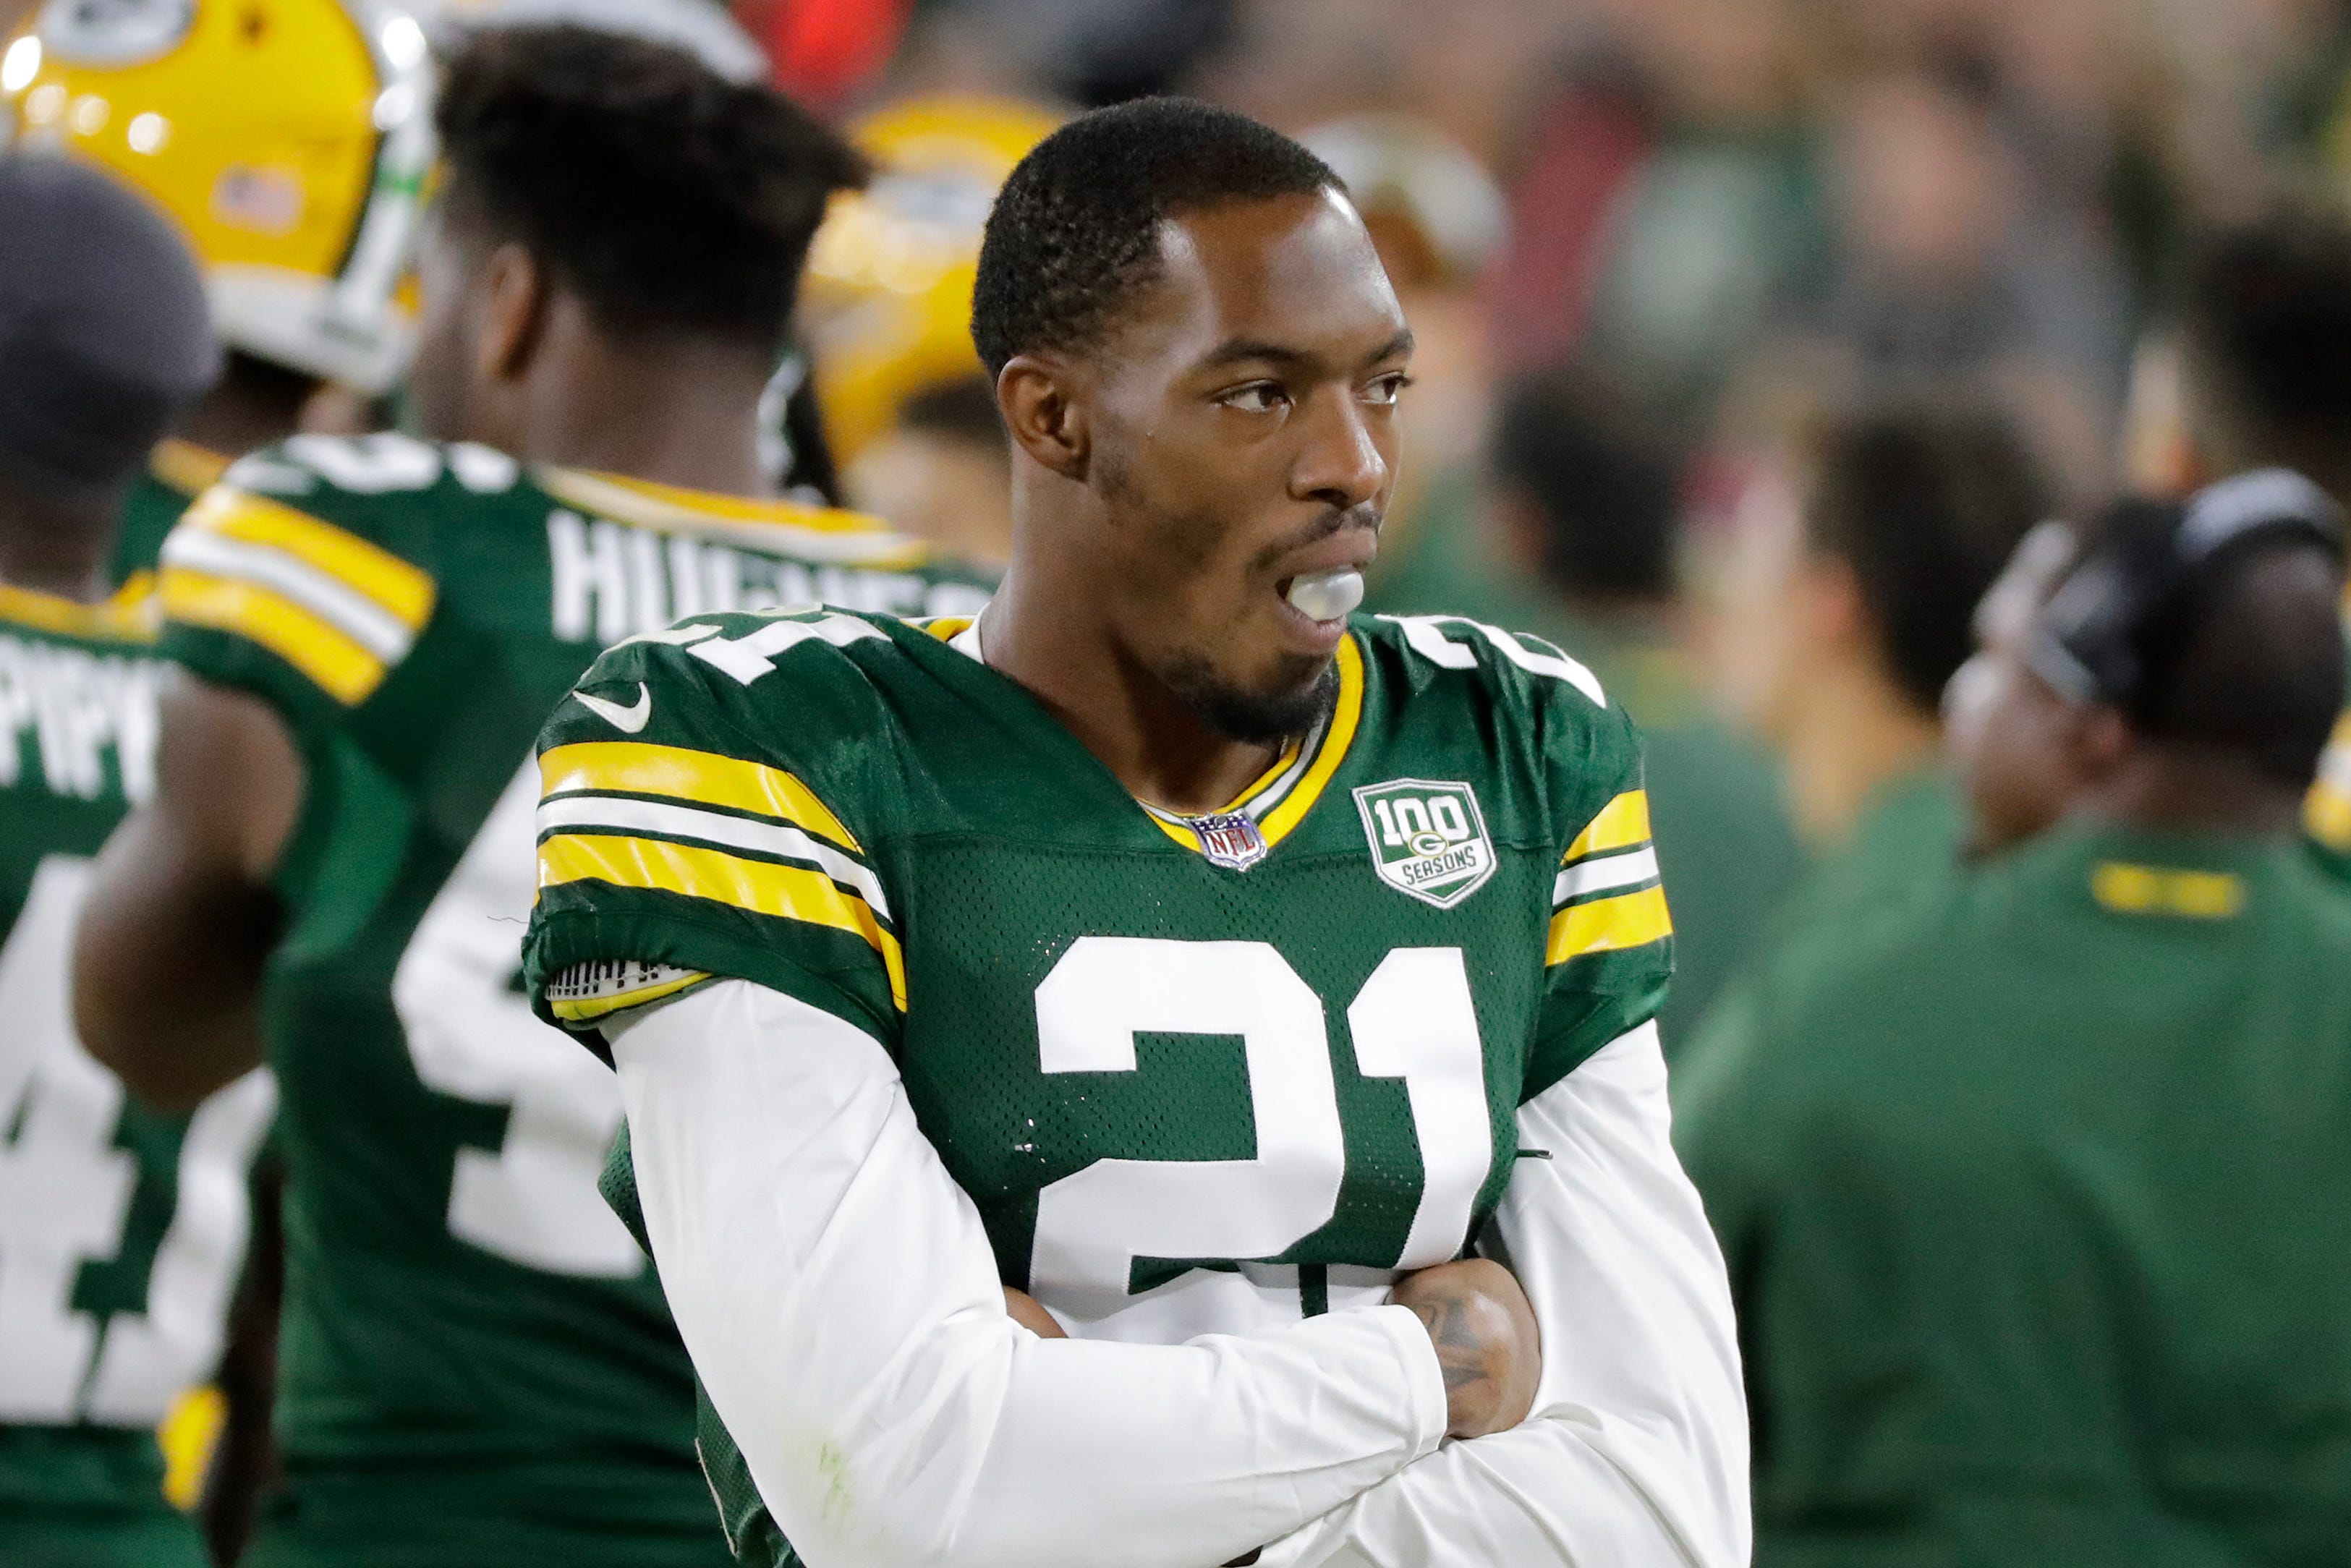 Green Bay Packers defensive back Ha Ha Clinton-Dix (21) chews gum on the sideline during an NFL preseason game at Lambeau Field on Thursday, August 9, 2018 in Green Bay, Wis.